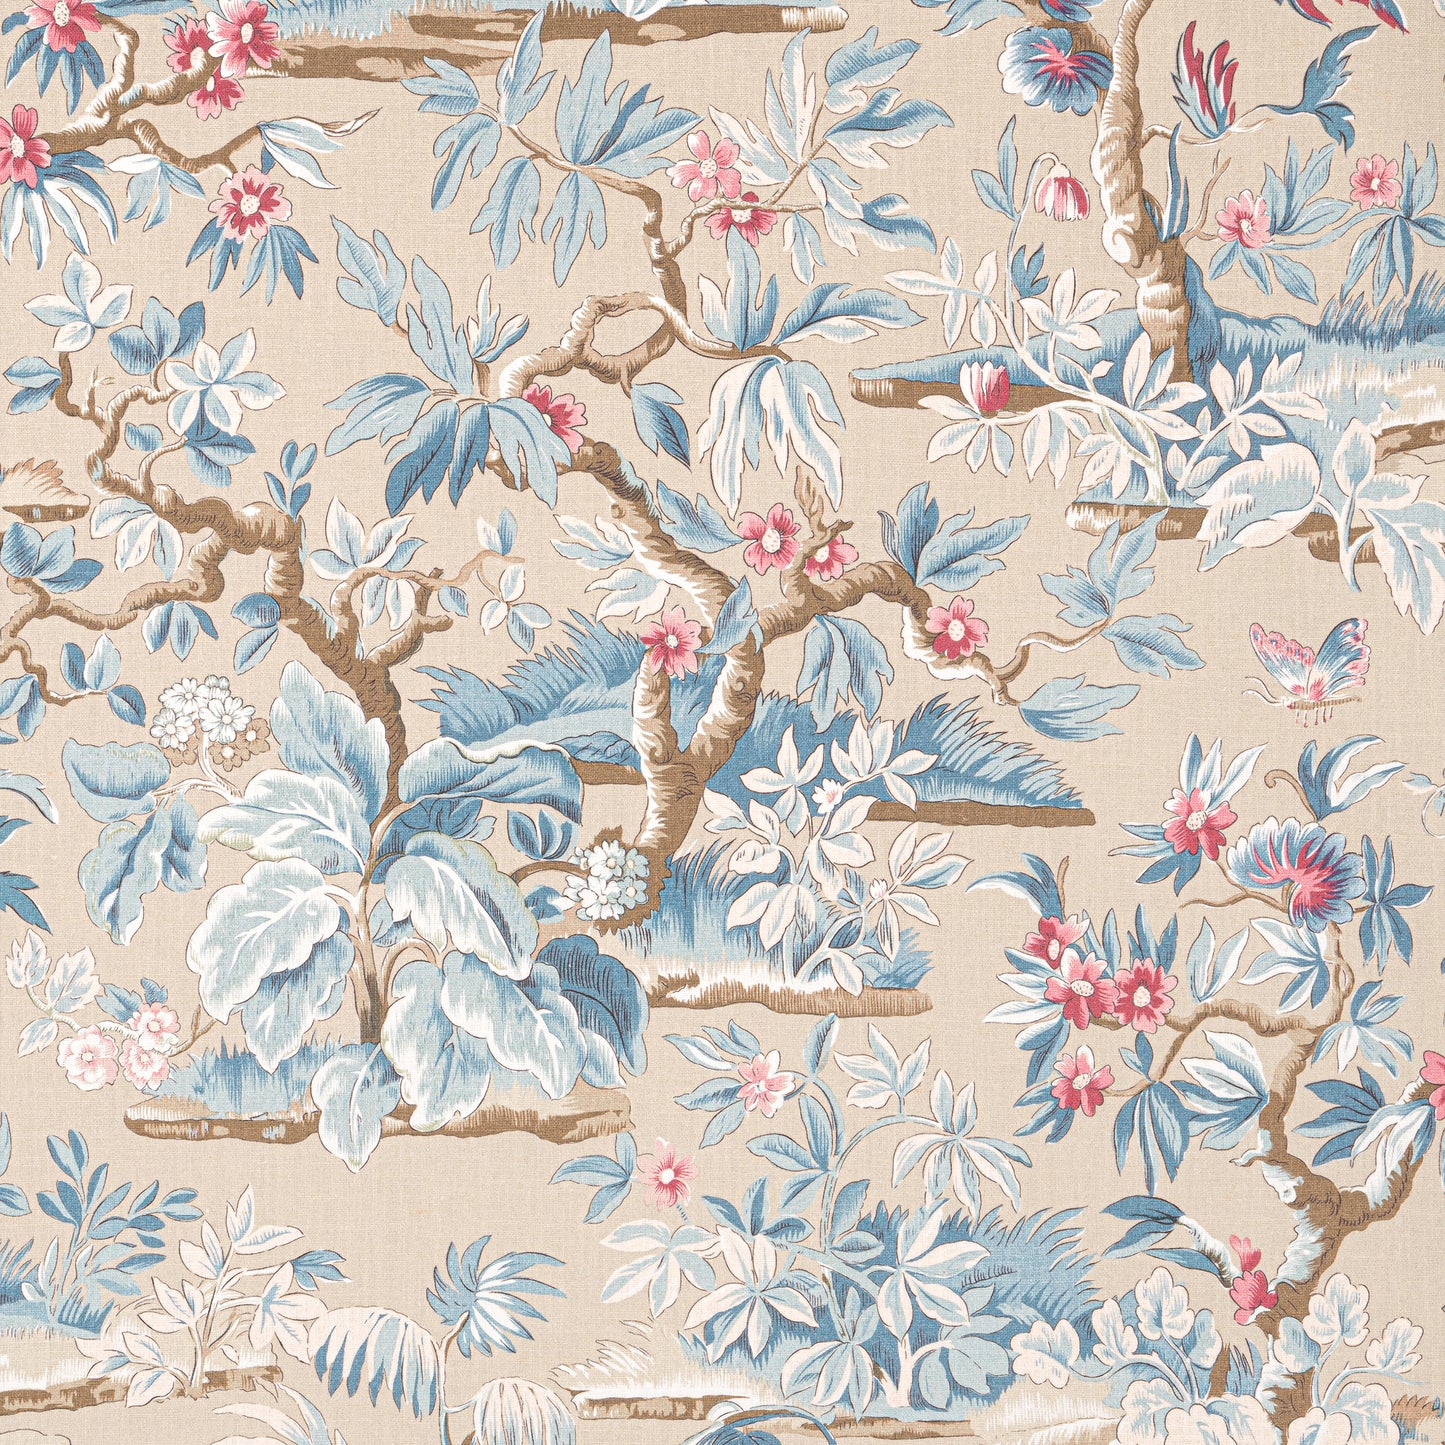 Purchase  Ann French Fabric Product AF24564  pattern name  Elwood